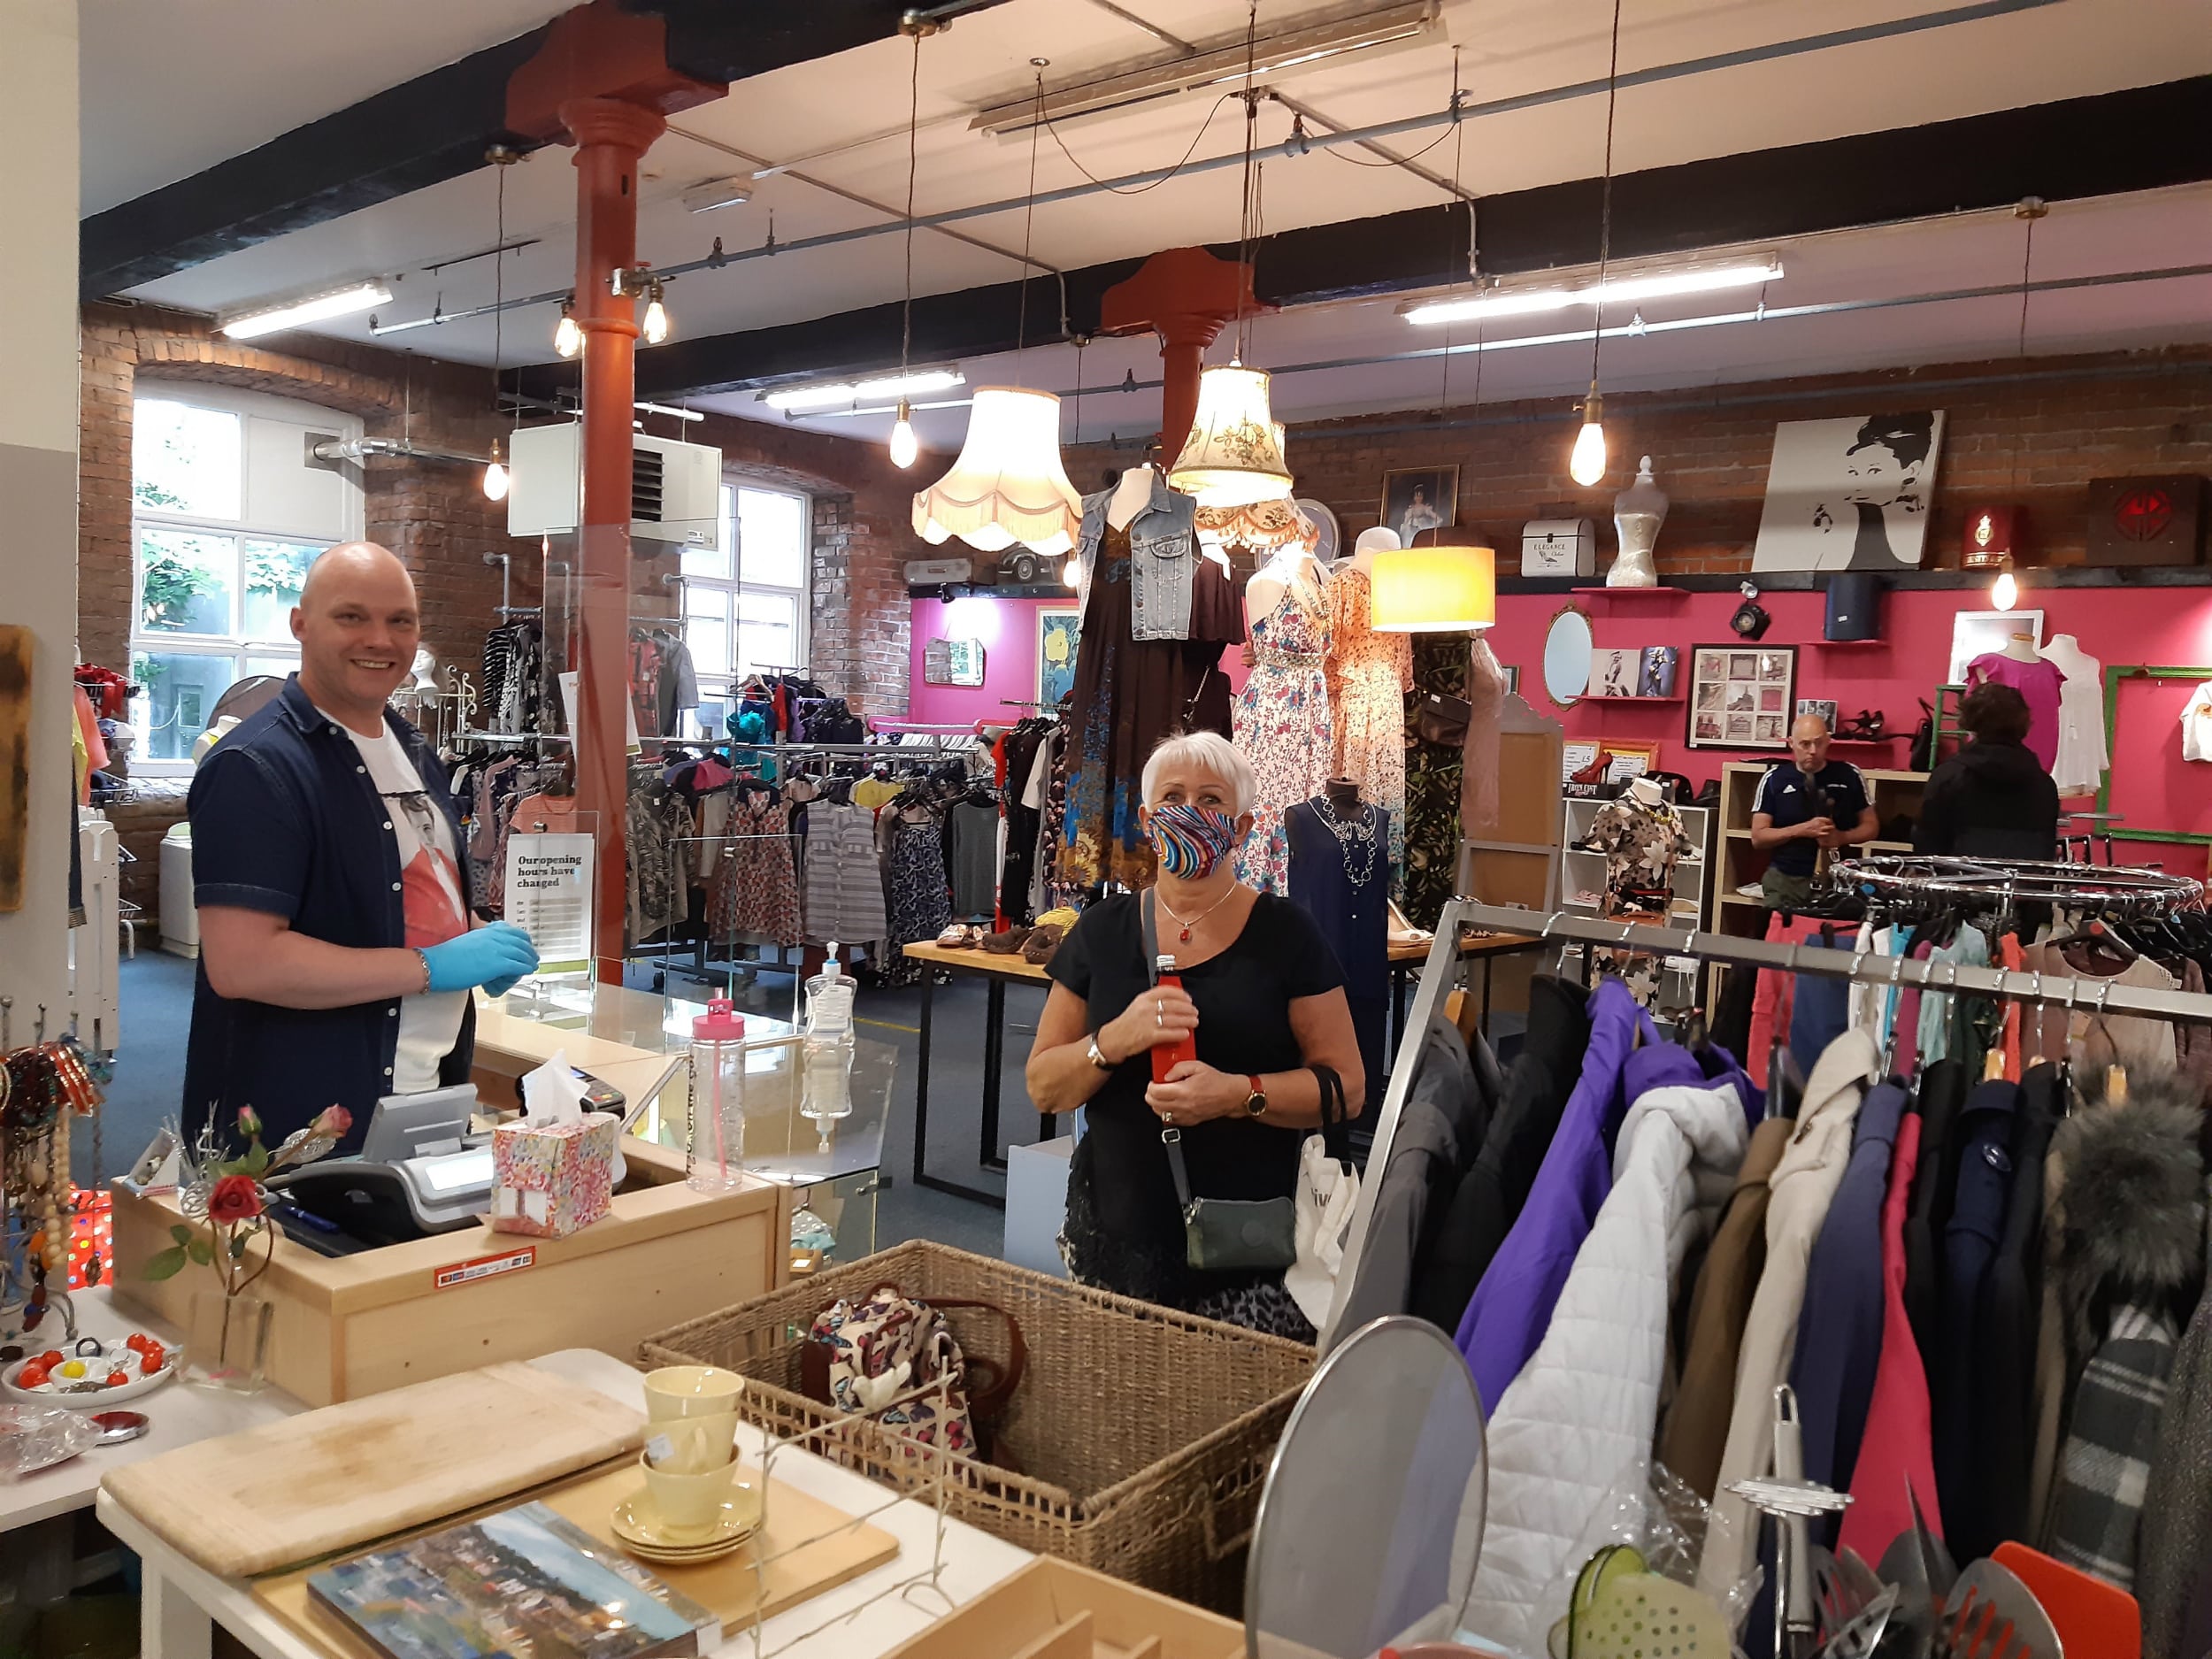 Reopening of Emmaus shops in the UK